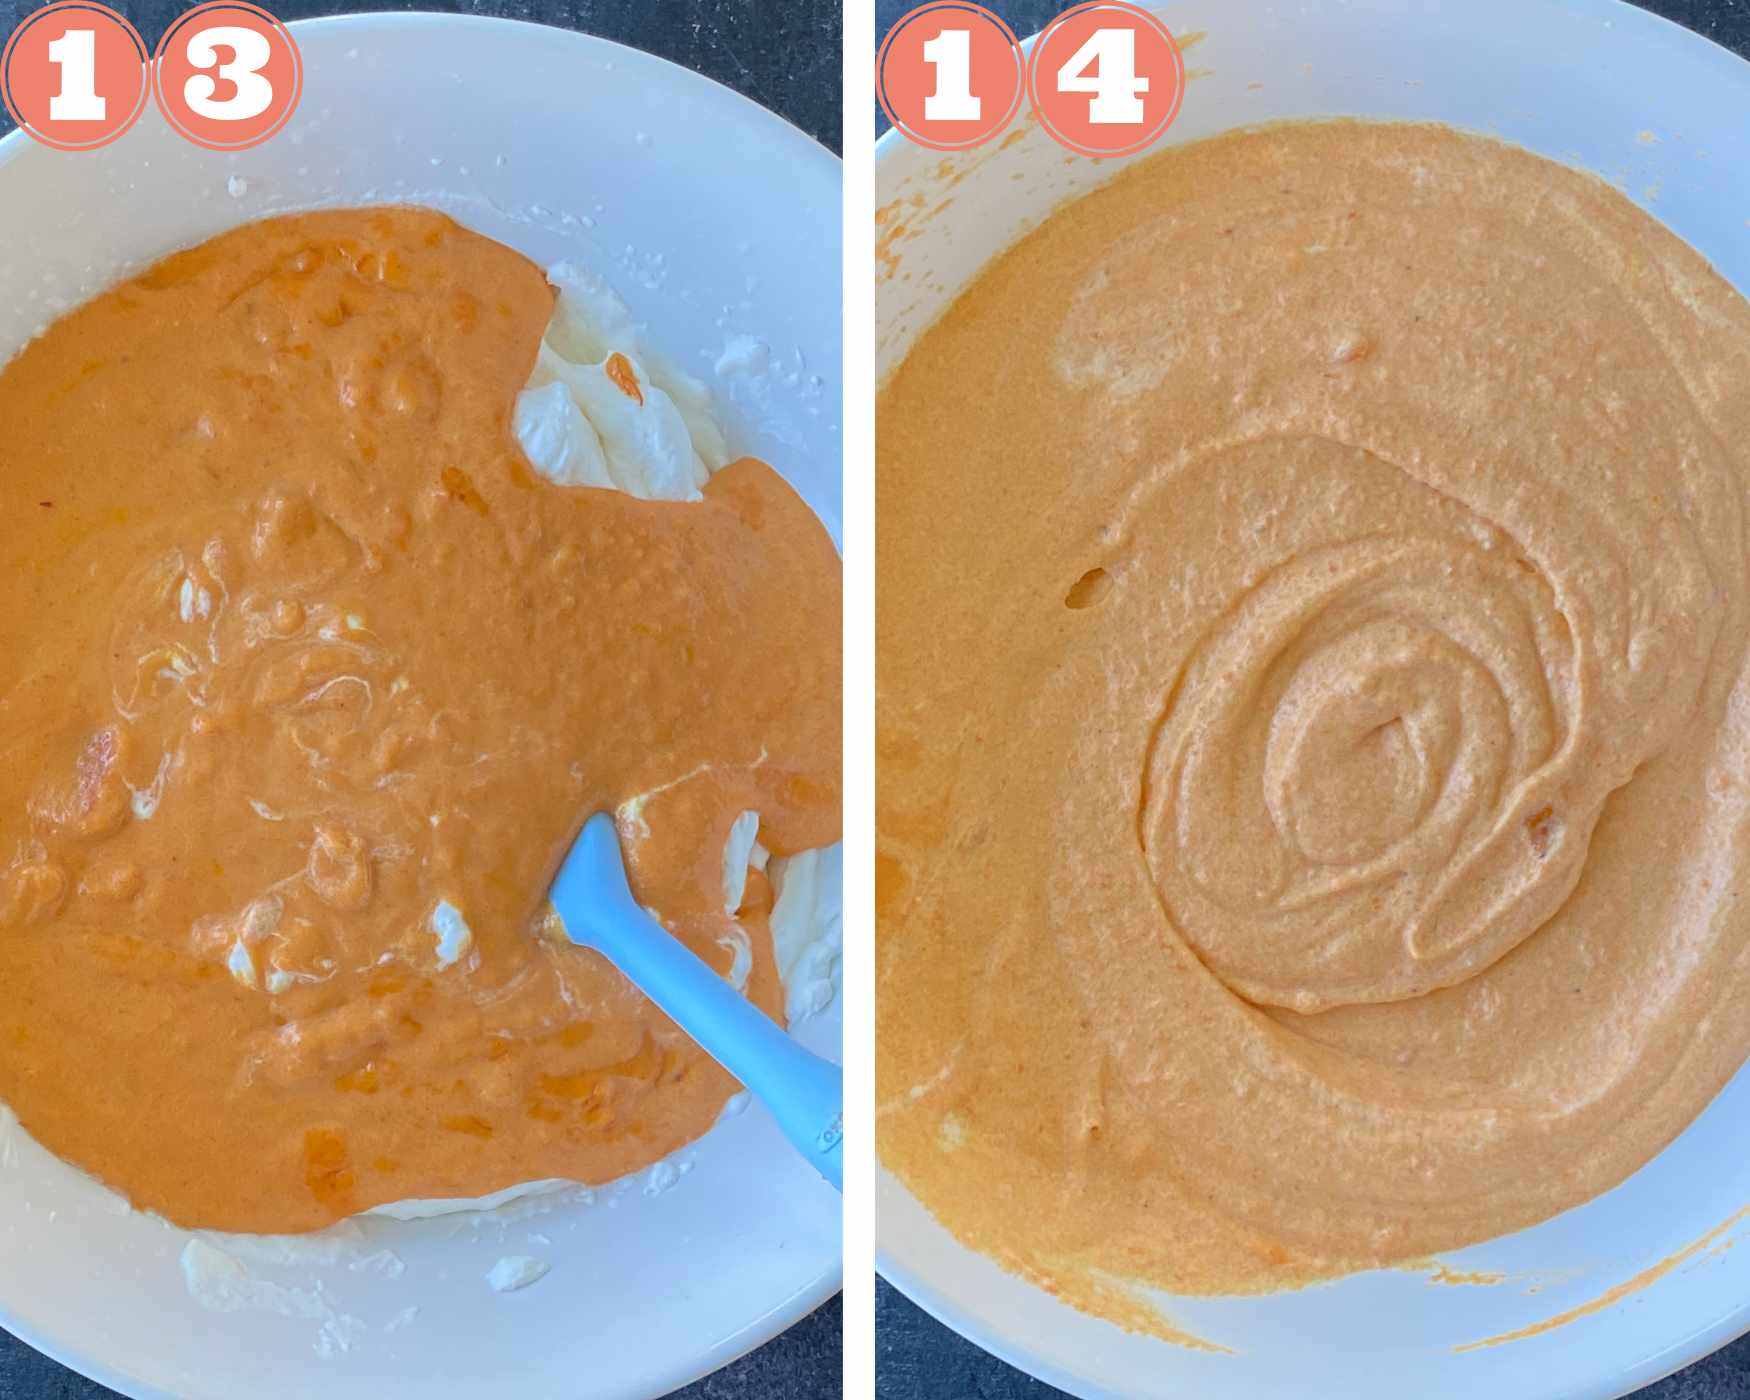 Add the chilled carrot mixture to the cream and fold it in.